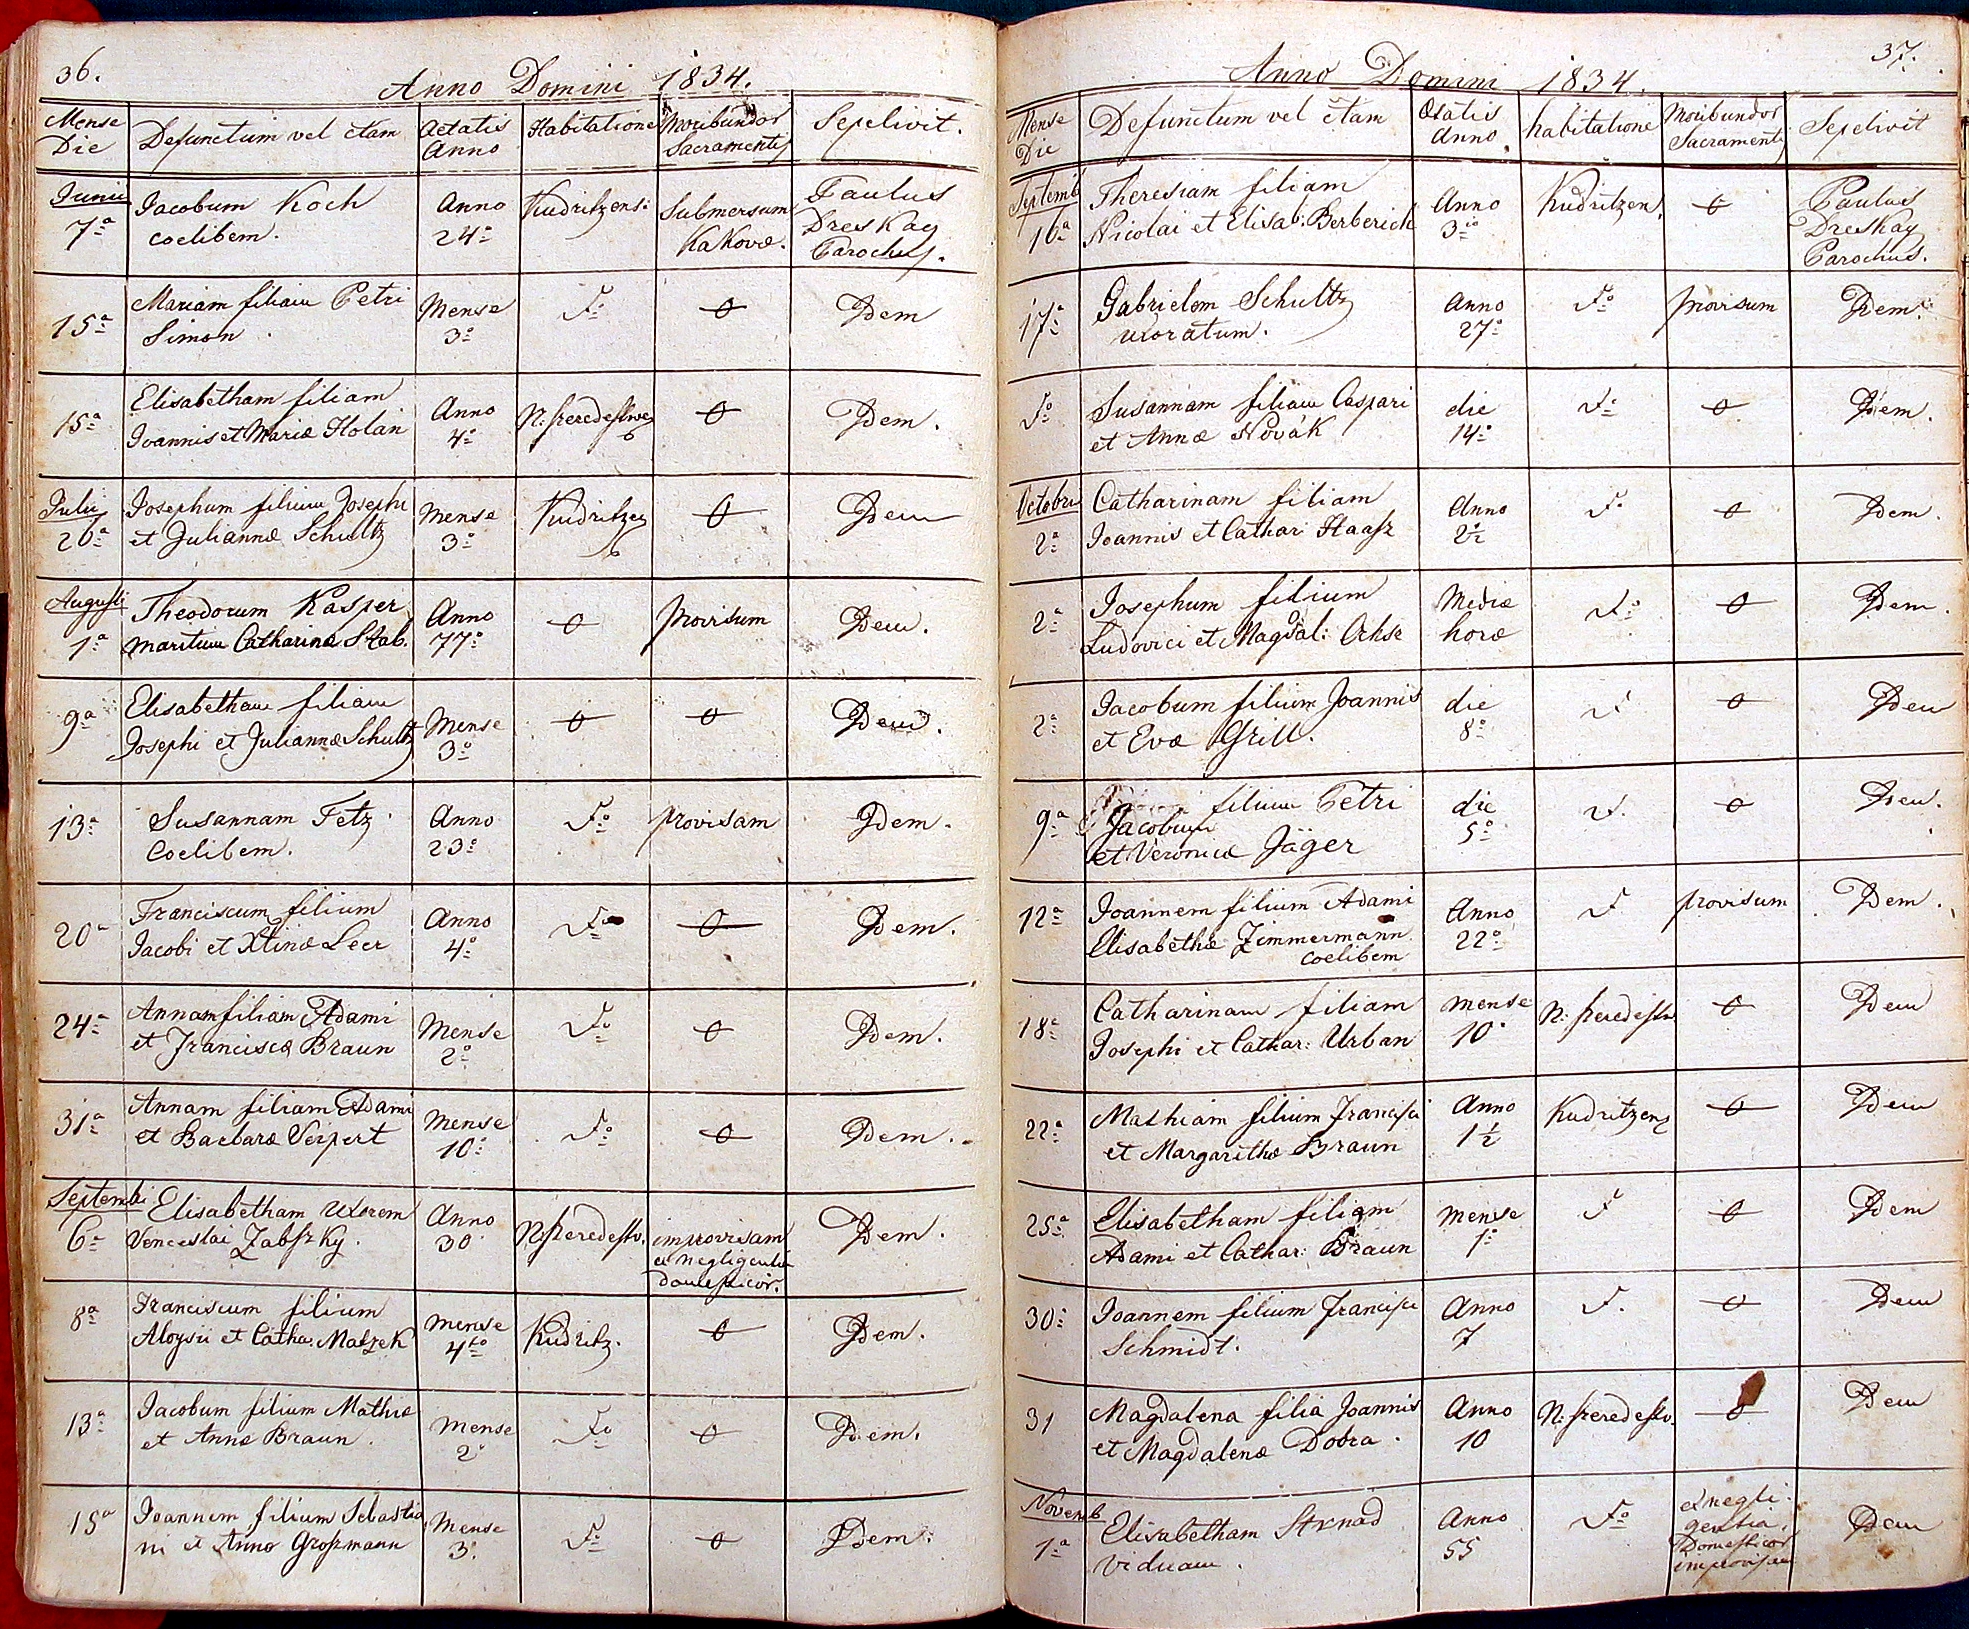 images/church_records/DEATHS/1775-1828D/036 i 037